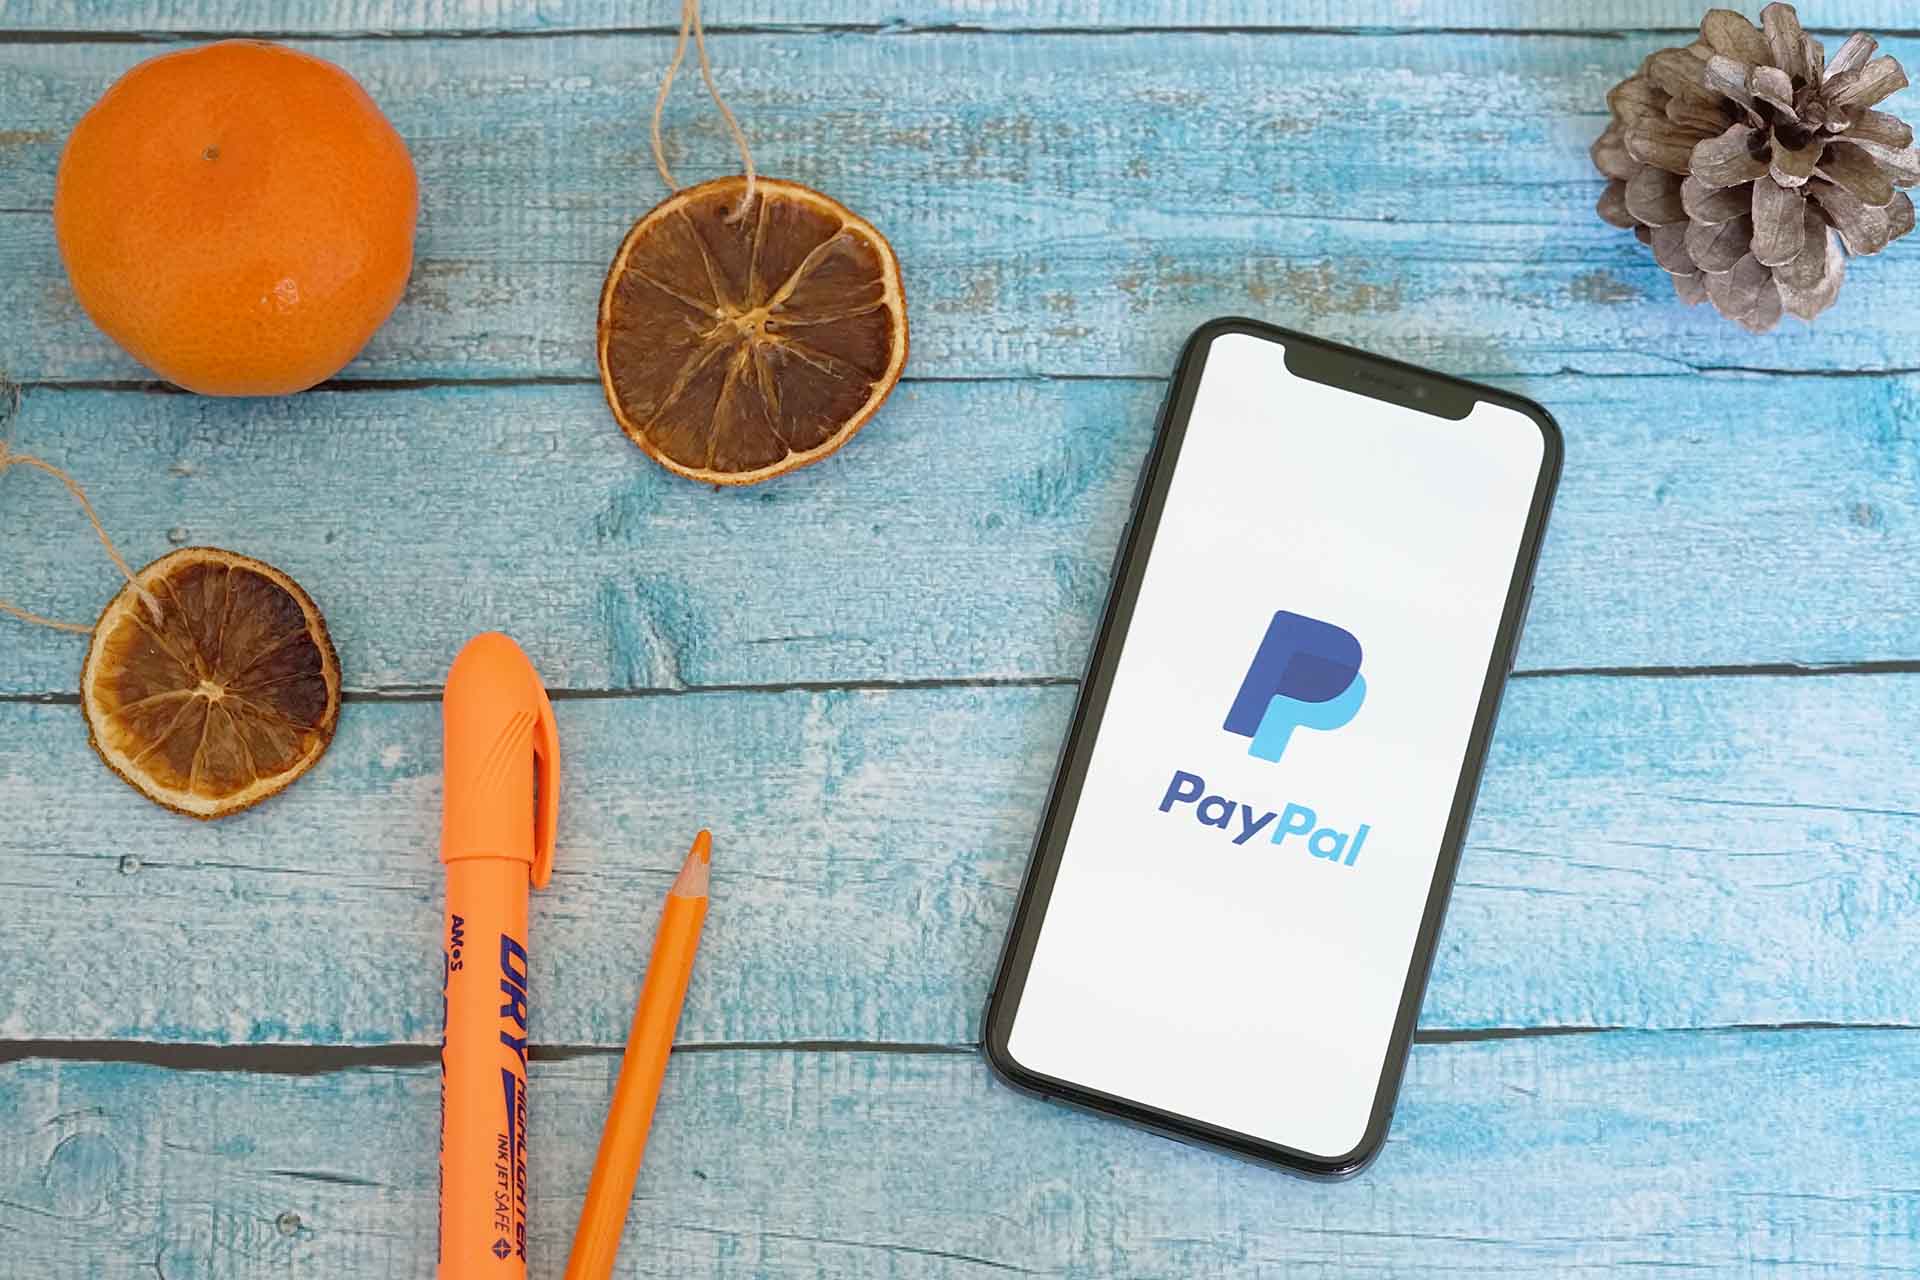 Does Paypal Credit Affect Your Credit Score? (Answered)